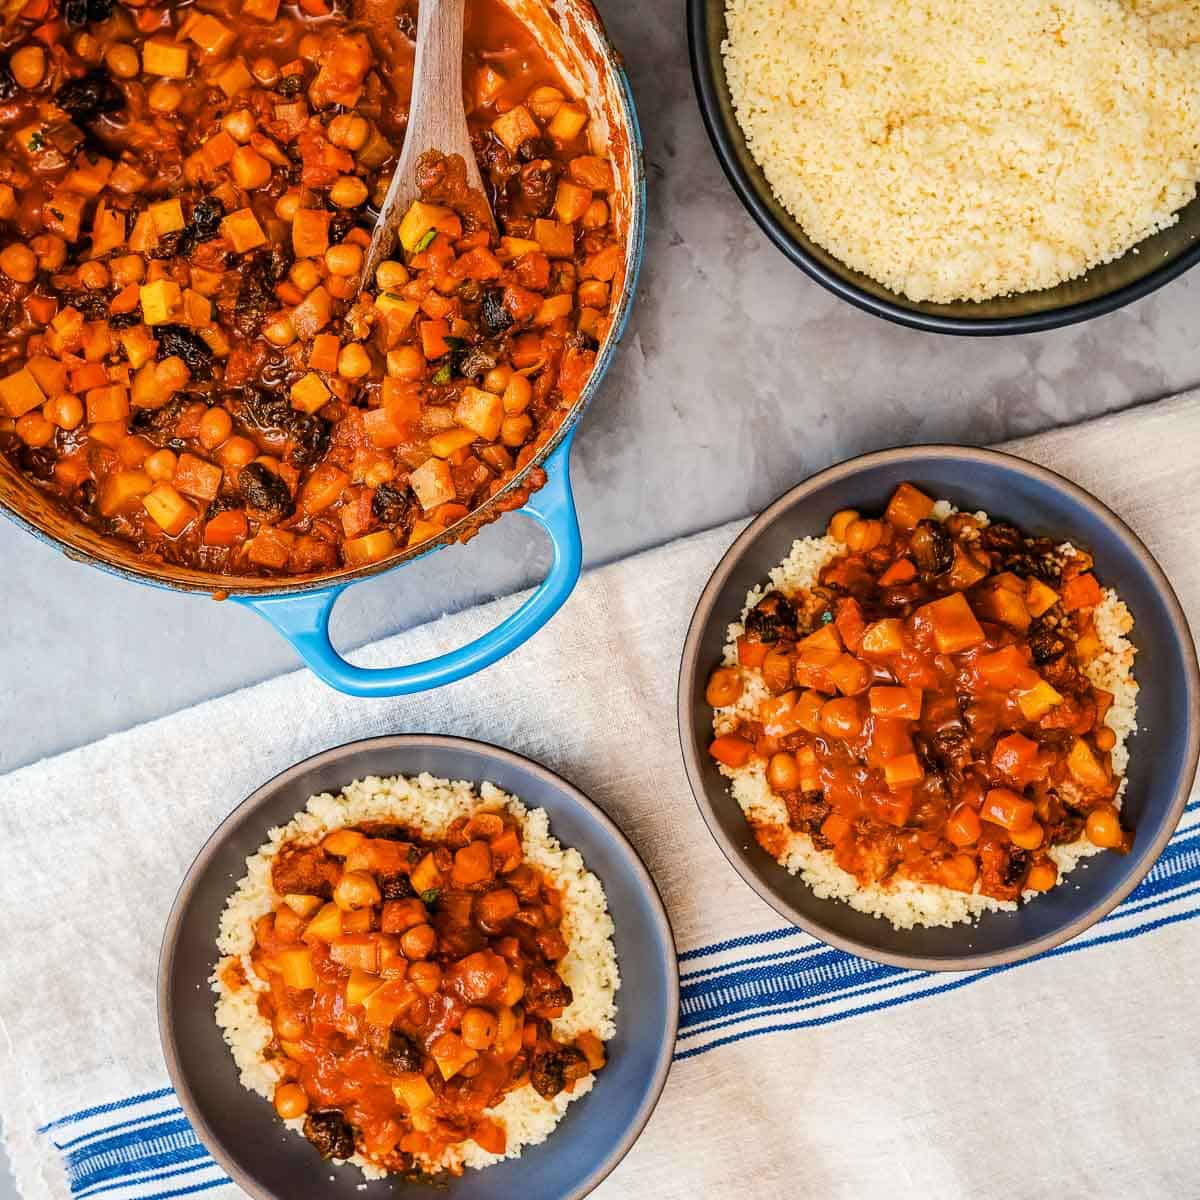 Two bowls of couscous topped with moroccan spiced root vegetables and beans next to an extra bowl of couscous and a Dutch oven of vegetables.